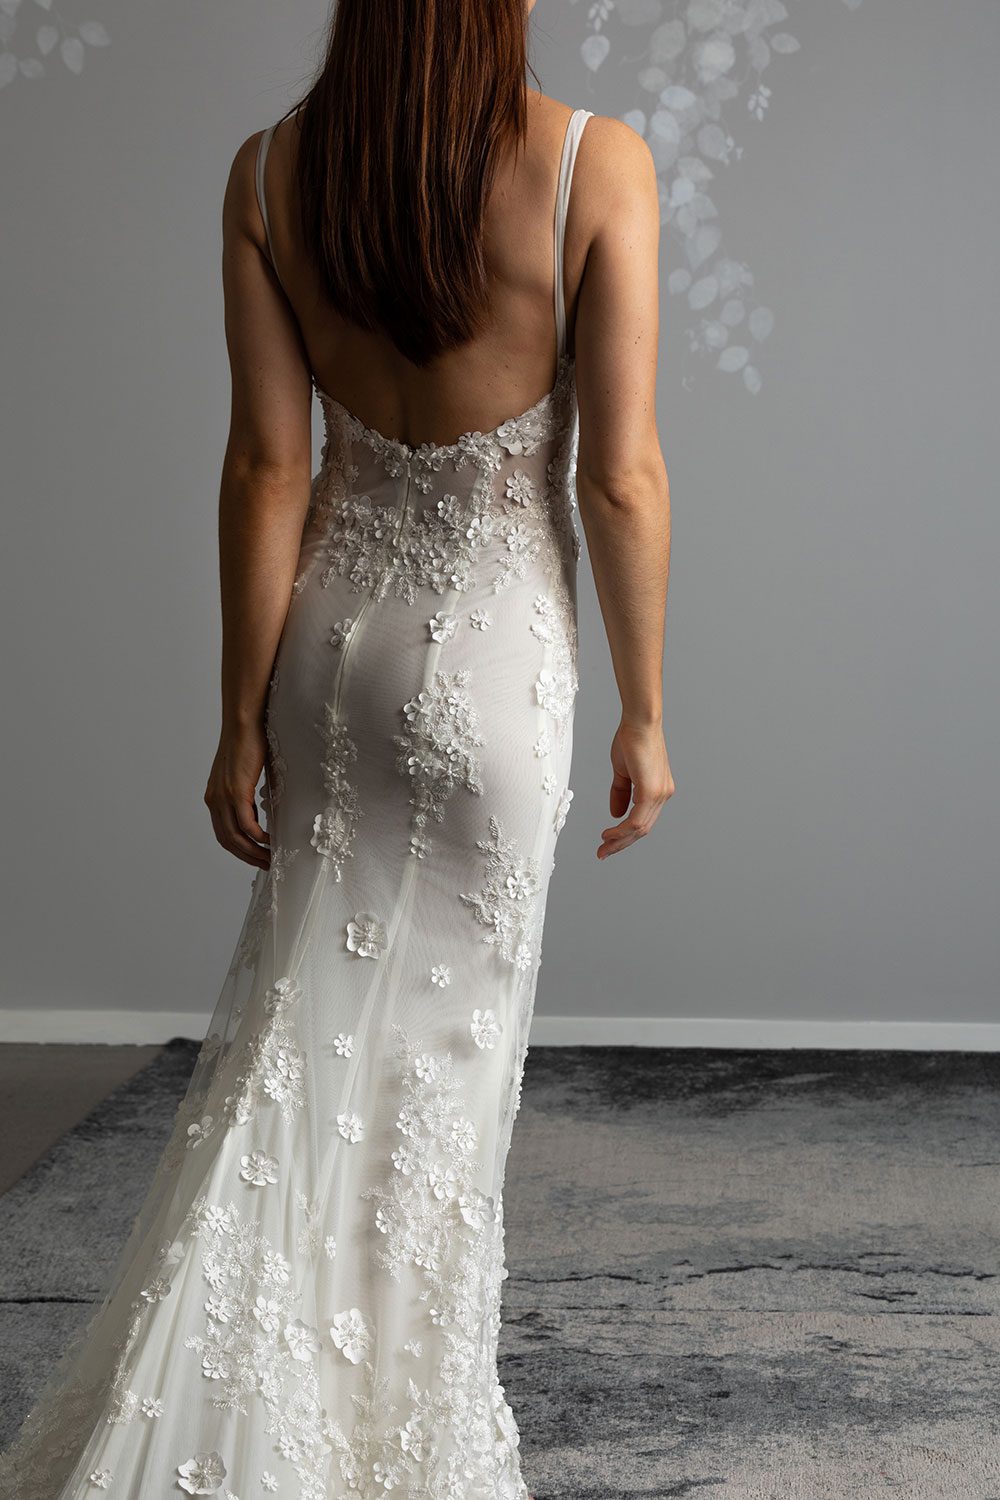 E'more Wedding gown from Vinka Design - This stunning lace wedding gown is hand sewn with a fully beaded 3D flower embroidery. Structured and boned bodice with scoop neckline in the front and low back. Stretch fit skirt flares into full lace train. Back view of low back and semi sheer base with 3D floral embroidery